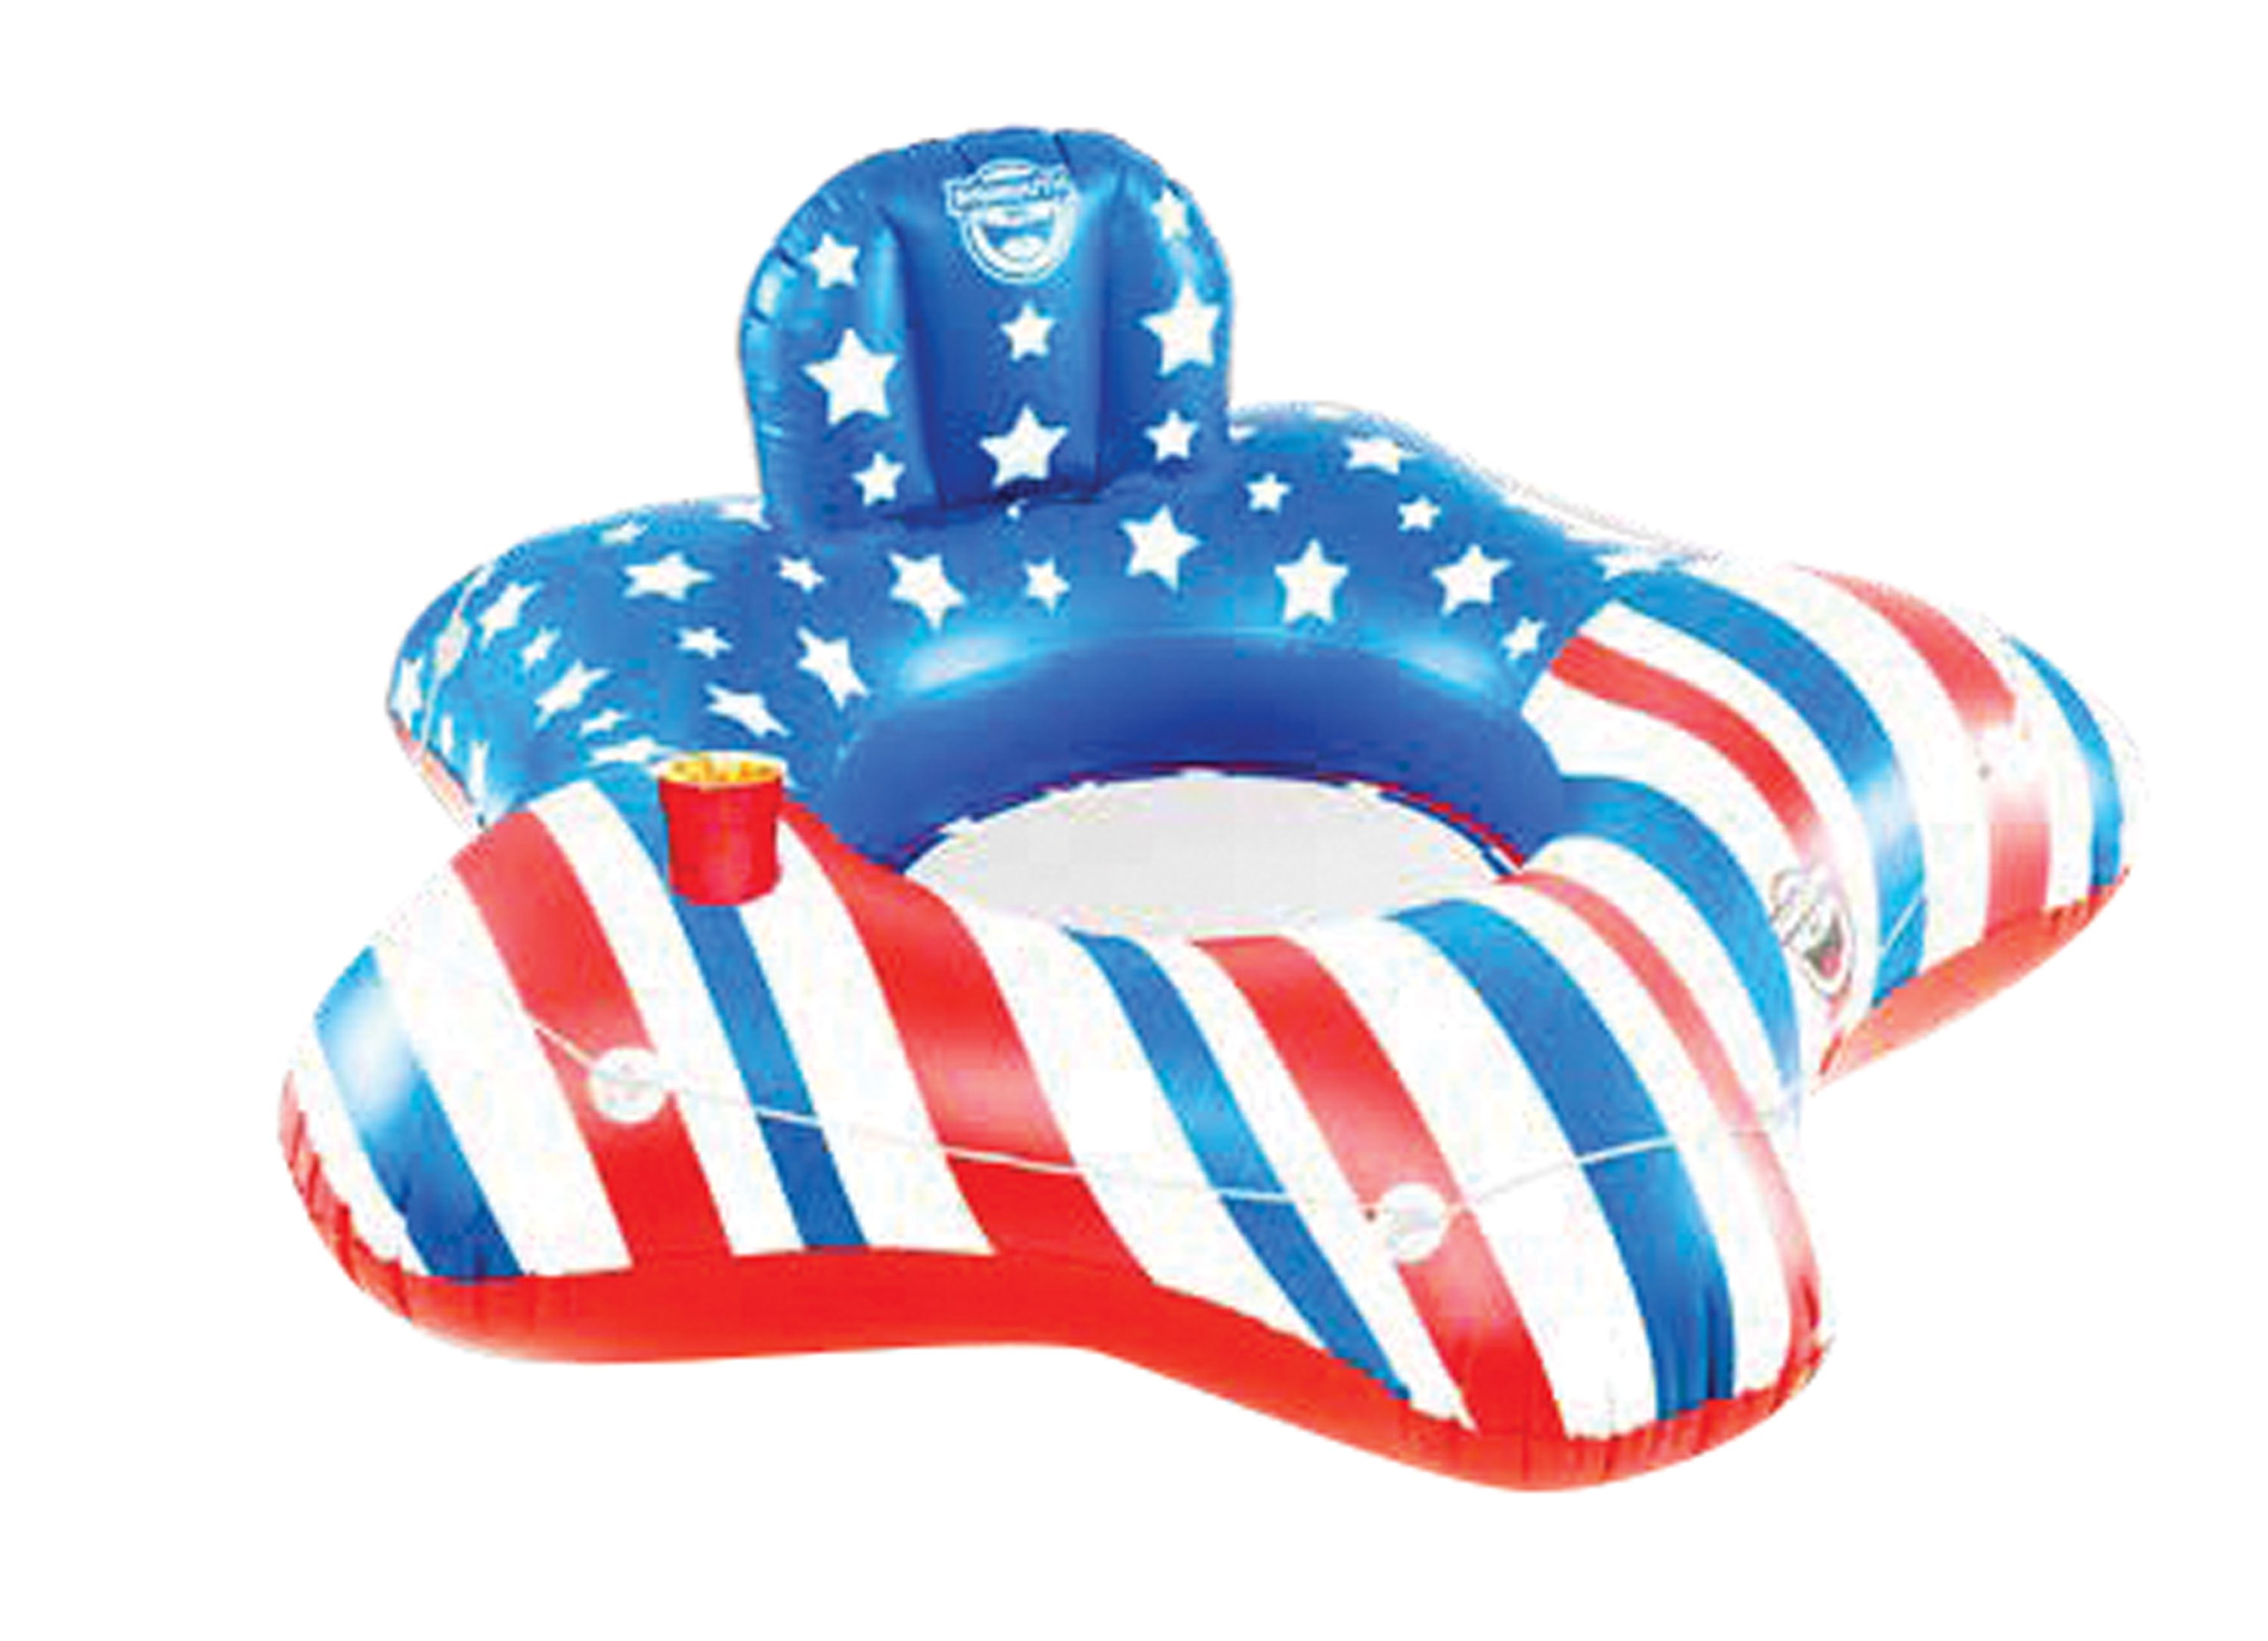 BigMouth 22-BRR-4145 Inflatable Giant Patriotic Star Pool Float